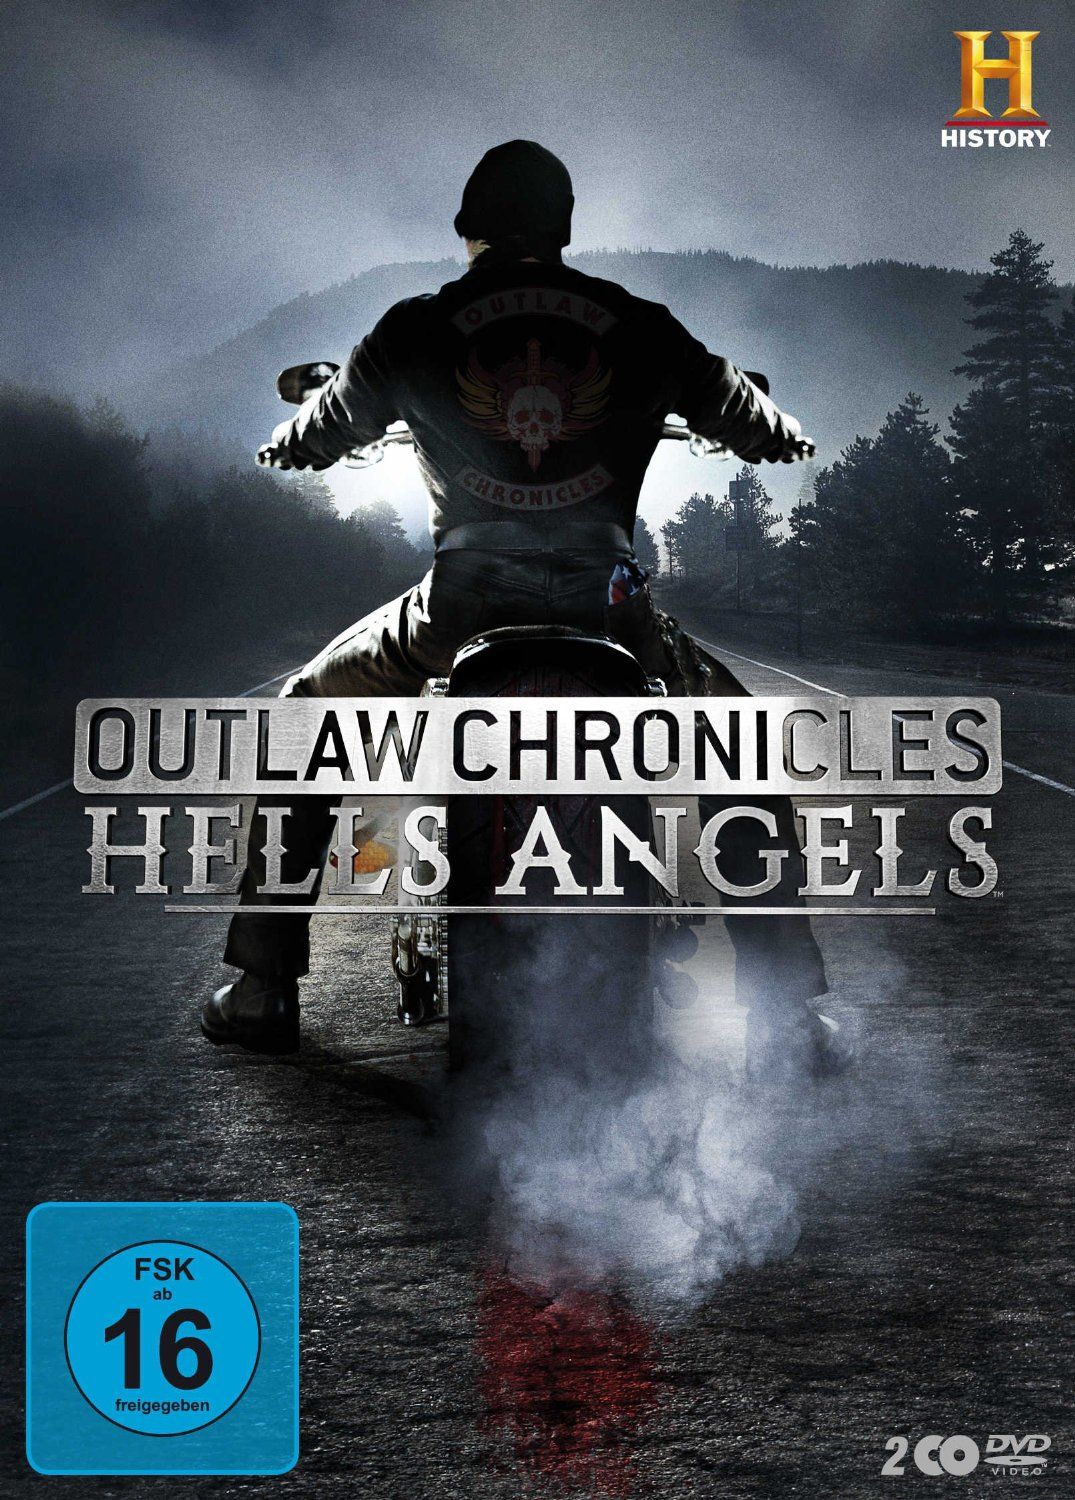 Outlaw Chronicles - Die Hells Angels (2 Discs)